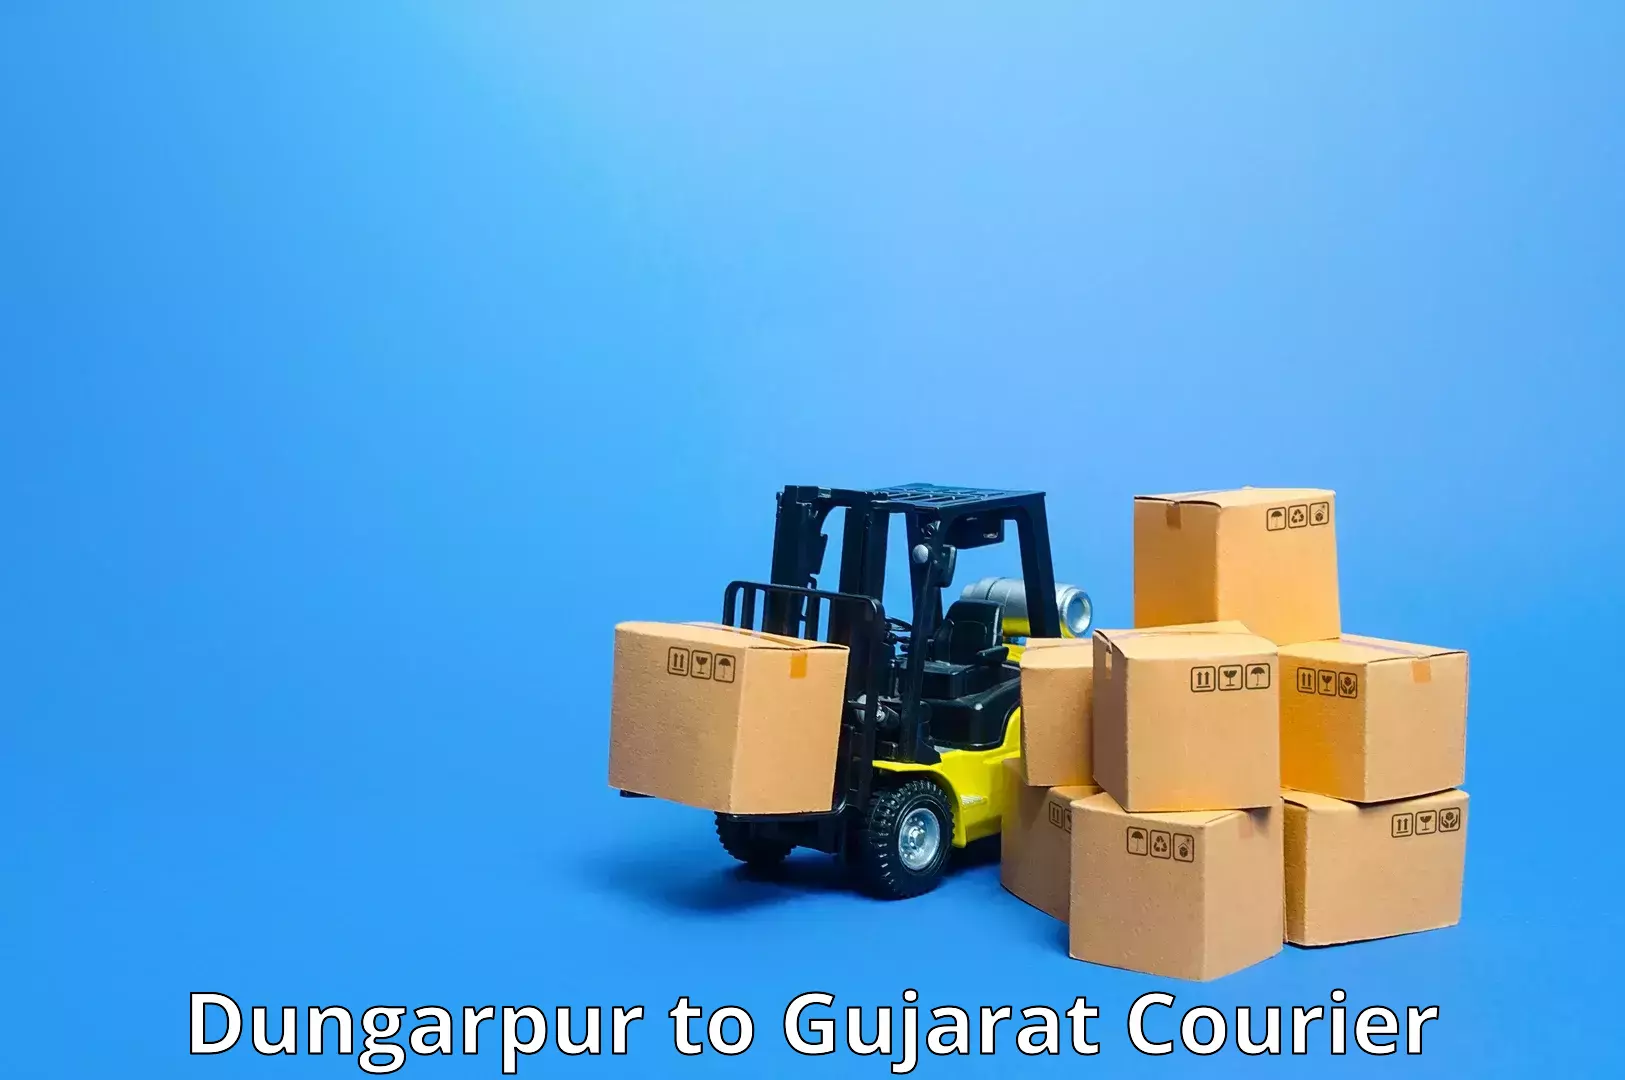 Flexible delivery schedules Dungarpur to Palitana